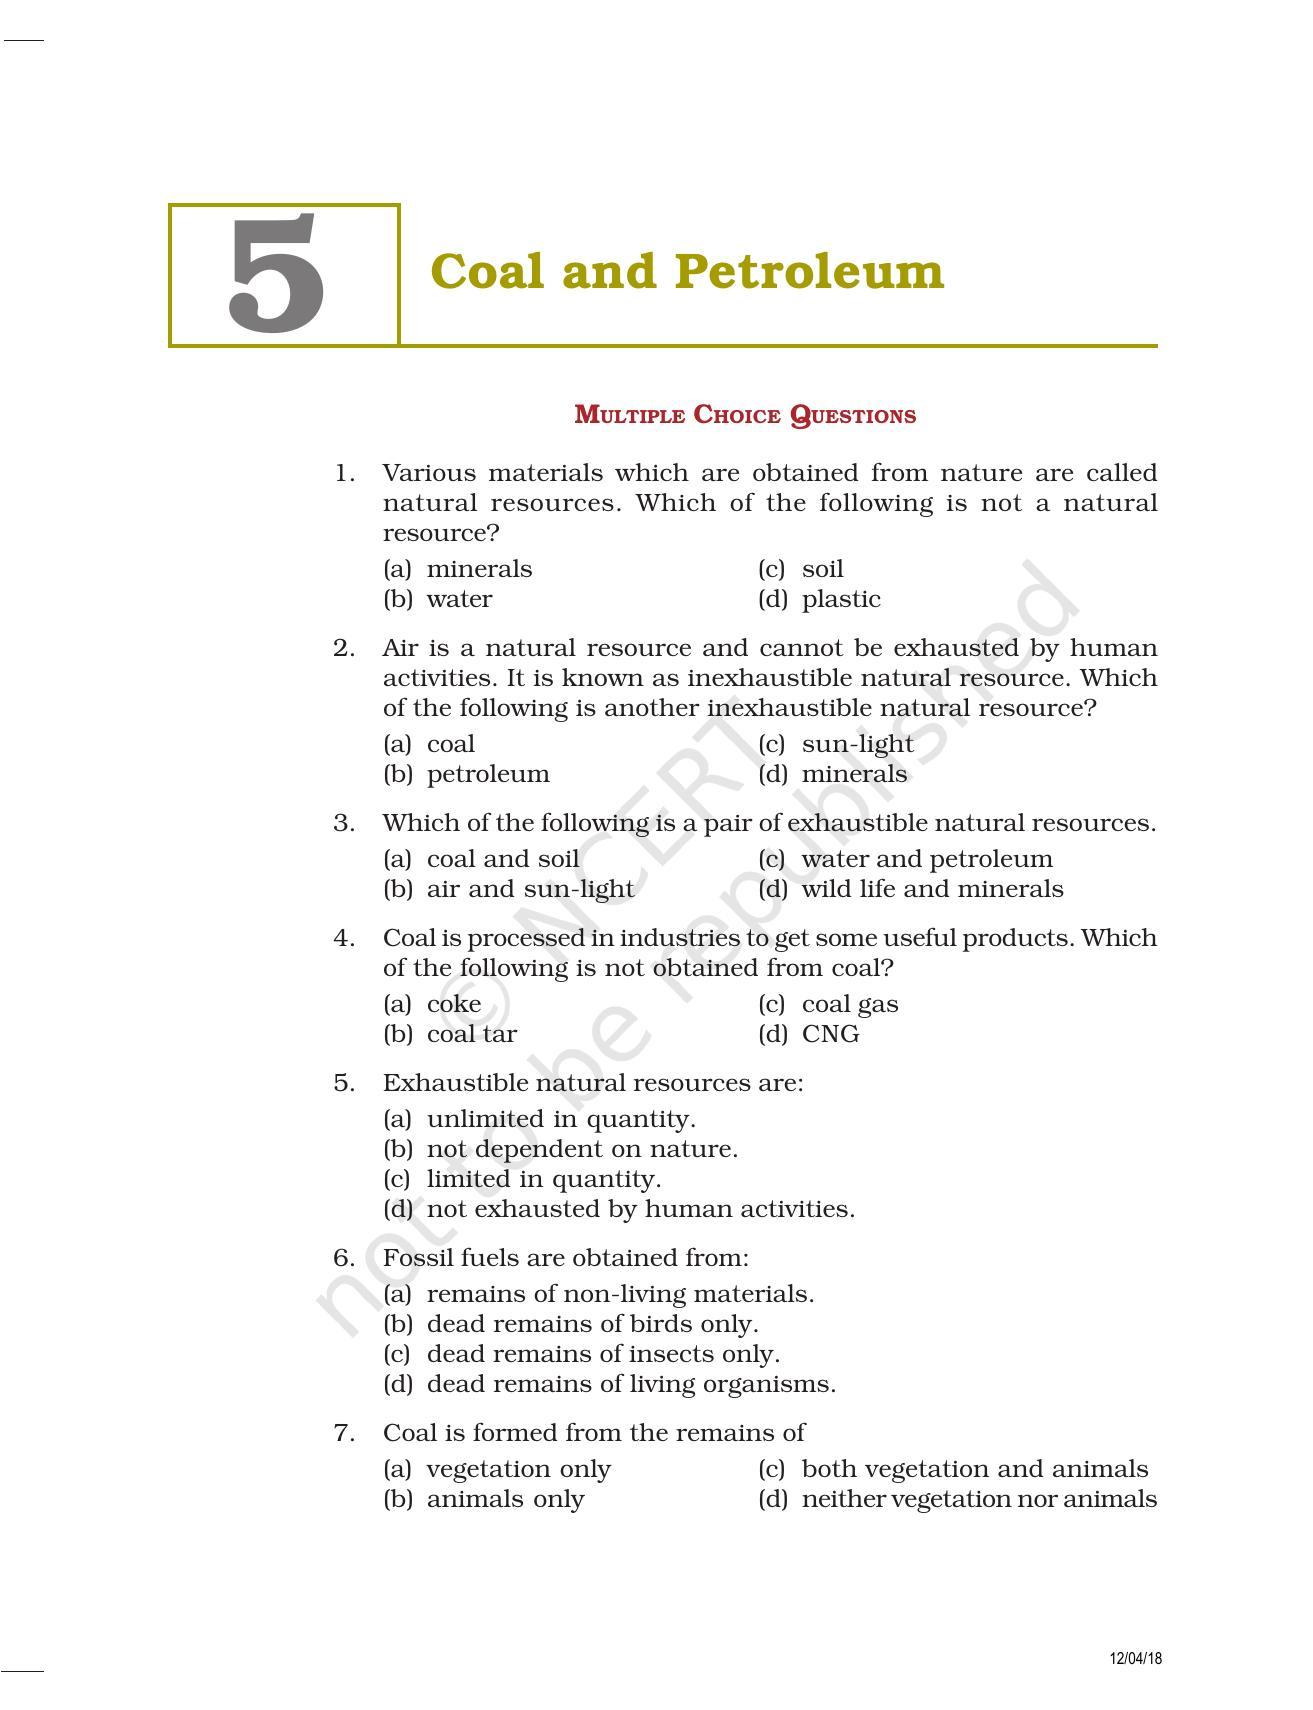 NCERT Exemplar Book for Class 8 Science: Chapter 5- Coal and Petroleum - Page 1